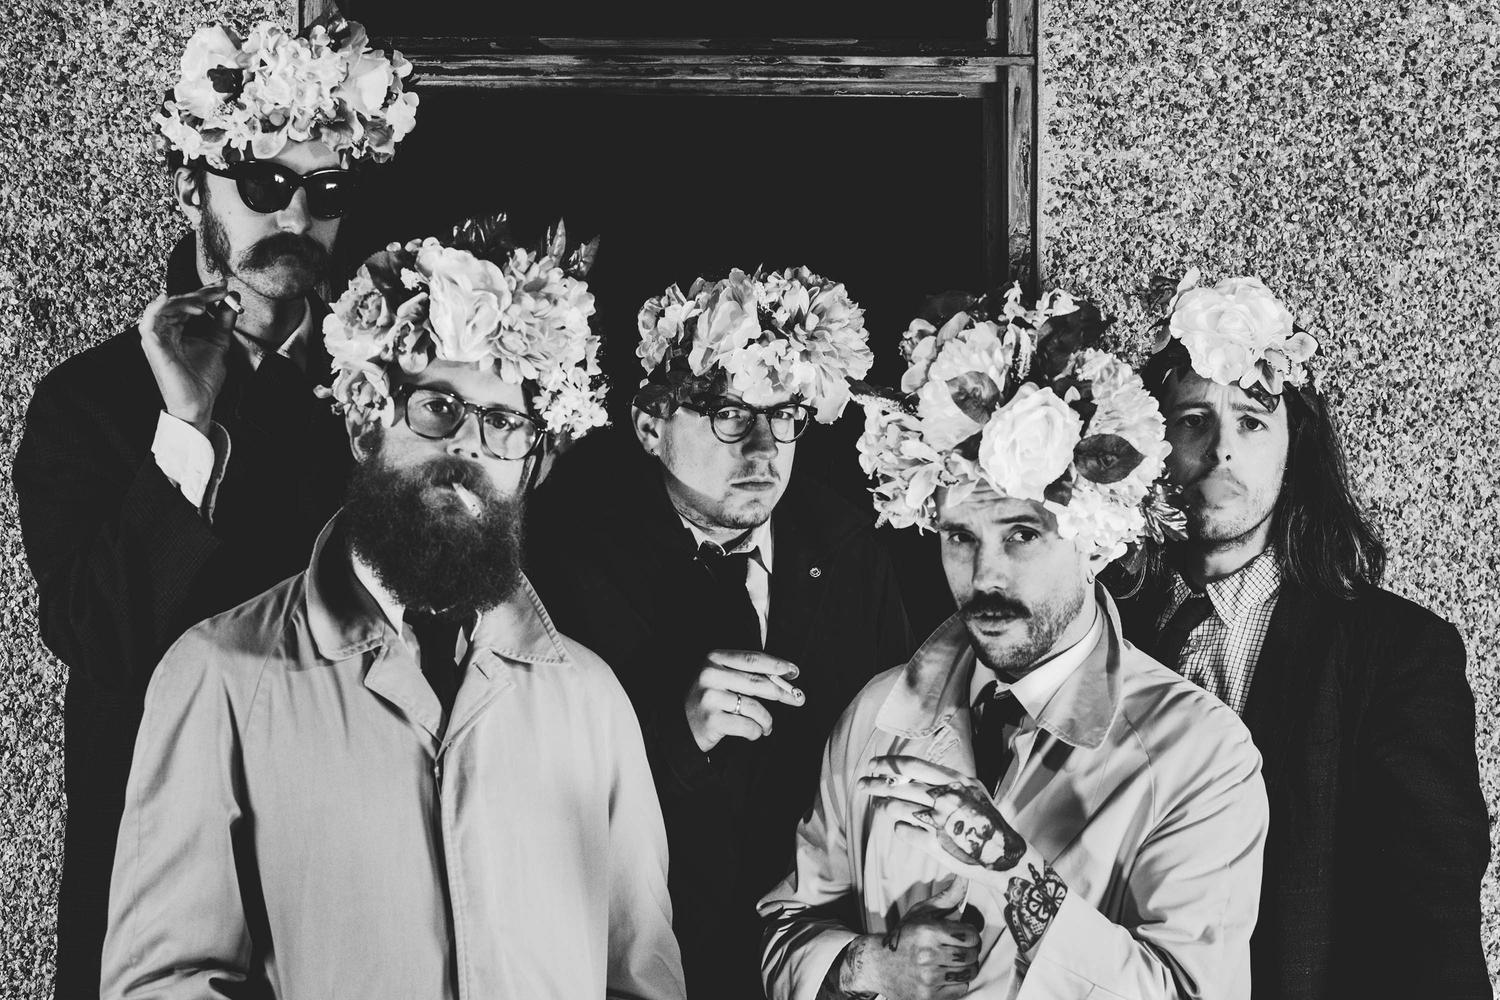 IDLES share blistering rally on toxic masculinity with new song ‘Samaritans’